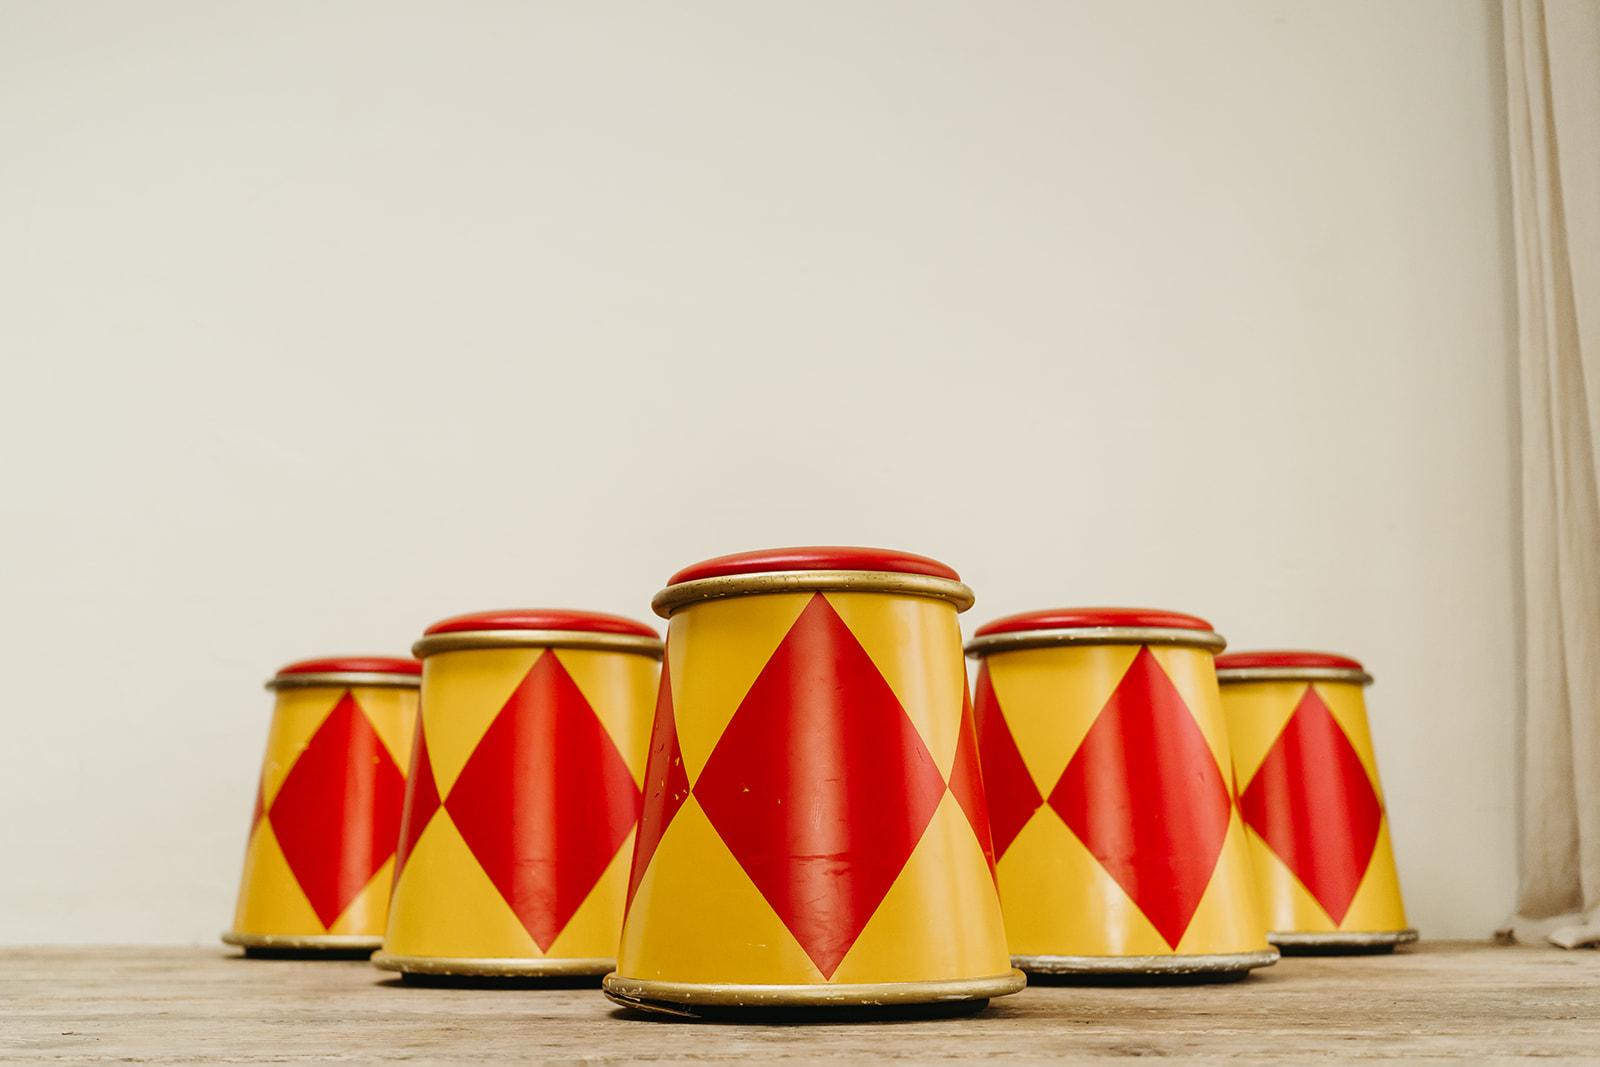 fun objects, this lot of 6 circus stools from the Eurodisney Hotel in Paris, France,
made during the 1980's ... sturdy, quirky, can be used everywhere ... 